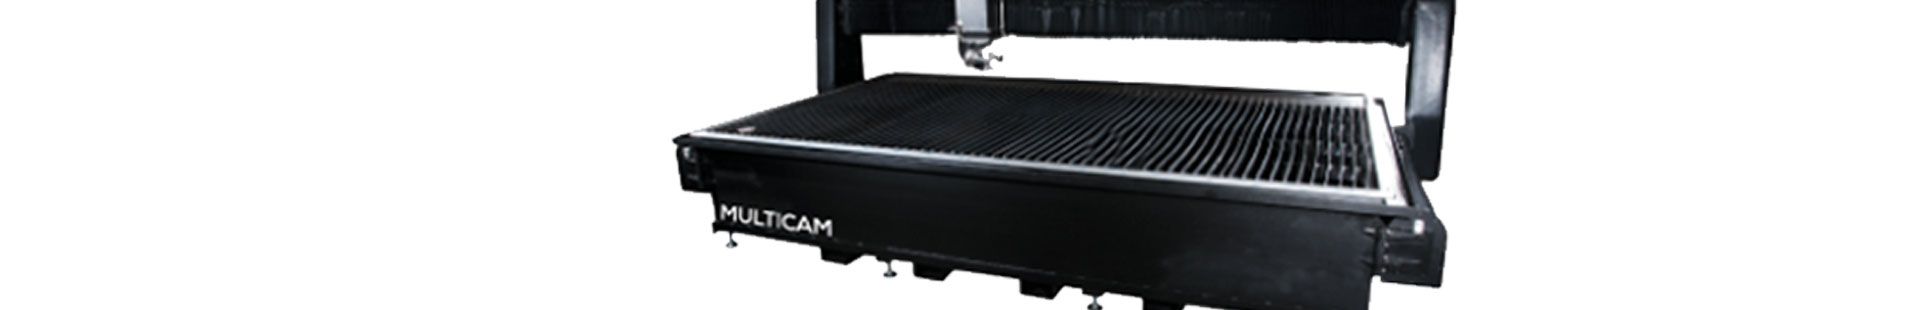 MULTICAM-CNC-FIVE-AXIS-FORMAT-WATERJET-CUTTING-TABLE-BANNER